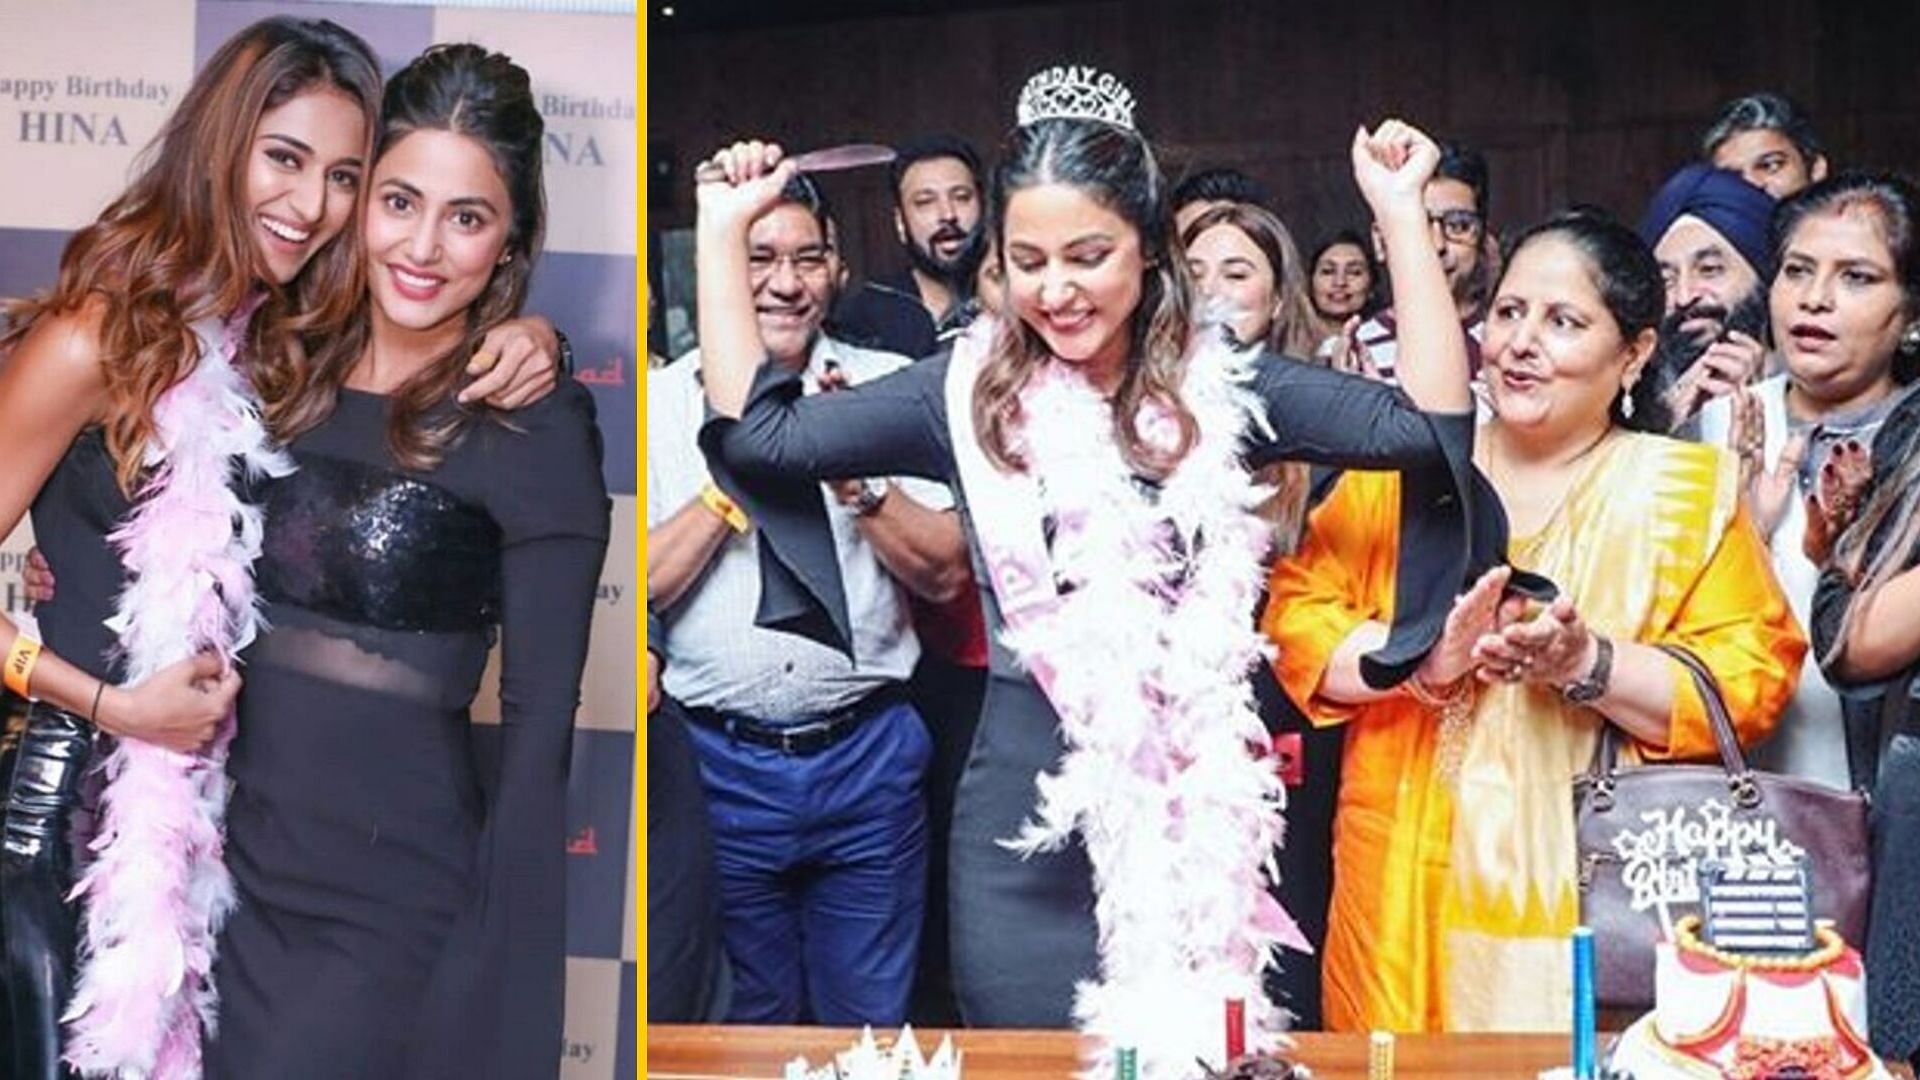 Hina Khan rings in her birthday with family and friends.